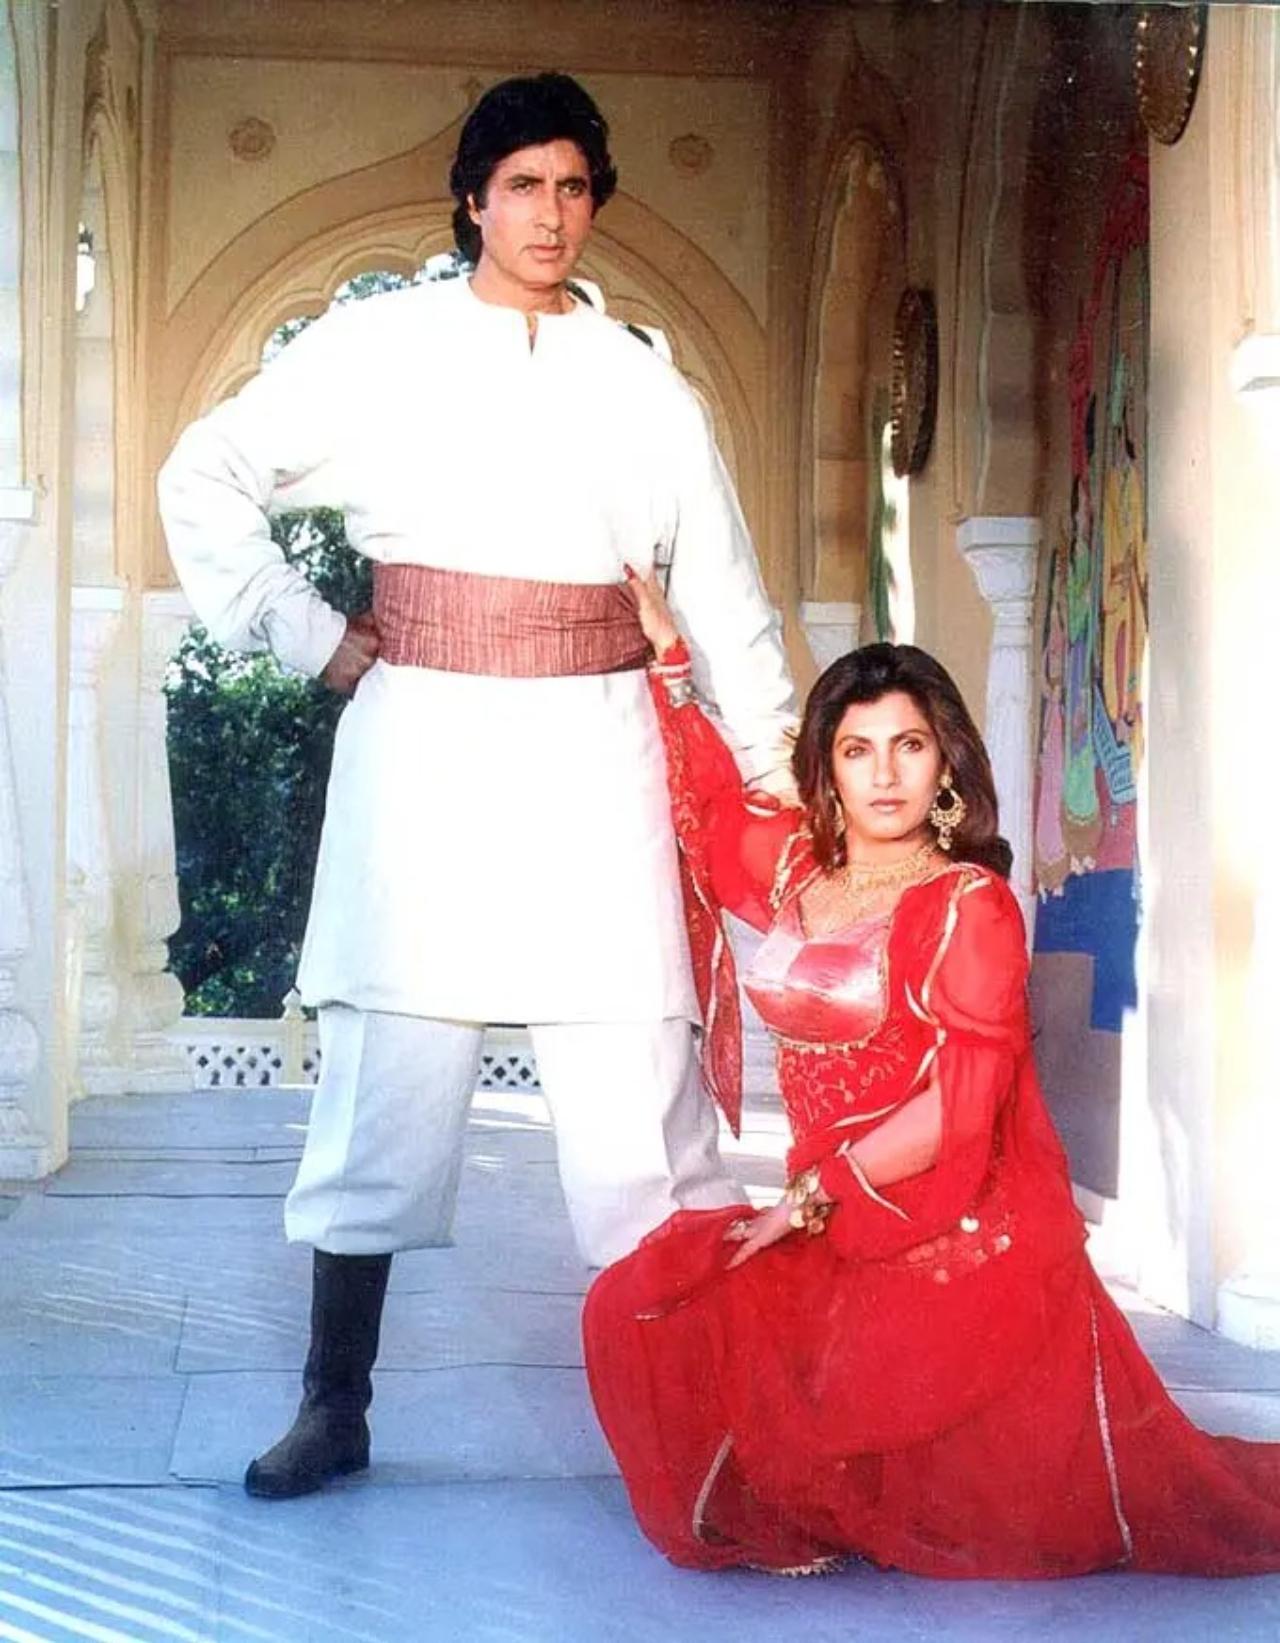 In picture: Dimple Kapadia with Amitabh Bachchan in 1991 film 'Ajooba'.
A lesser-known fact about Dimple Kapadia: The actress did a screen test for 'Saagar' and fared very badly, literally shivering through her act. But, director Ramesh Sippy showed faith in her and signed her on for the film, which turned to be a major success at the box office